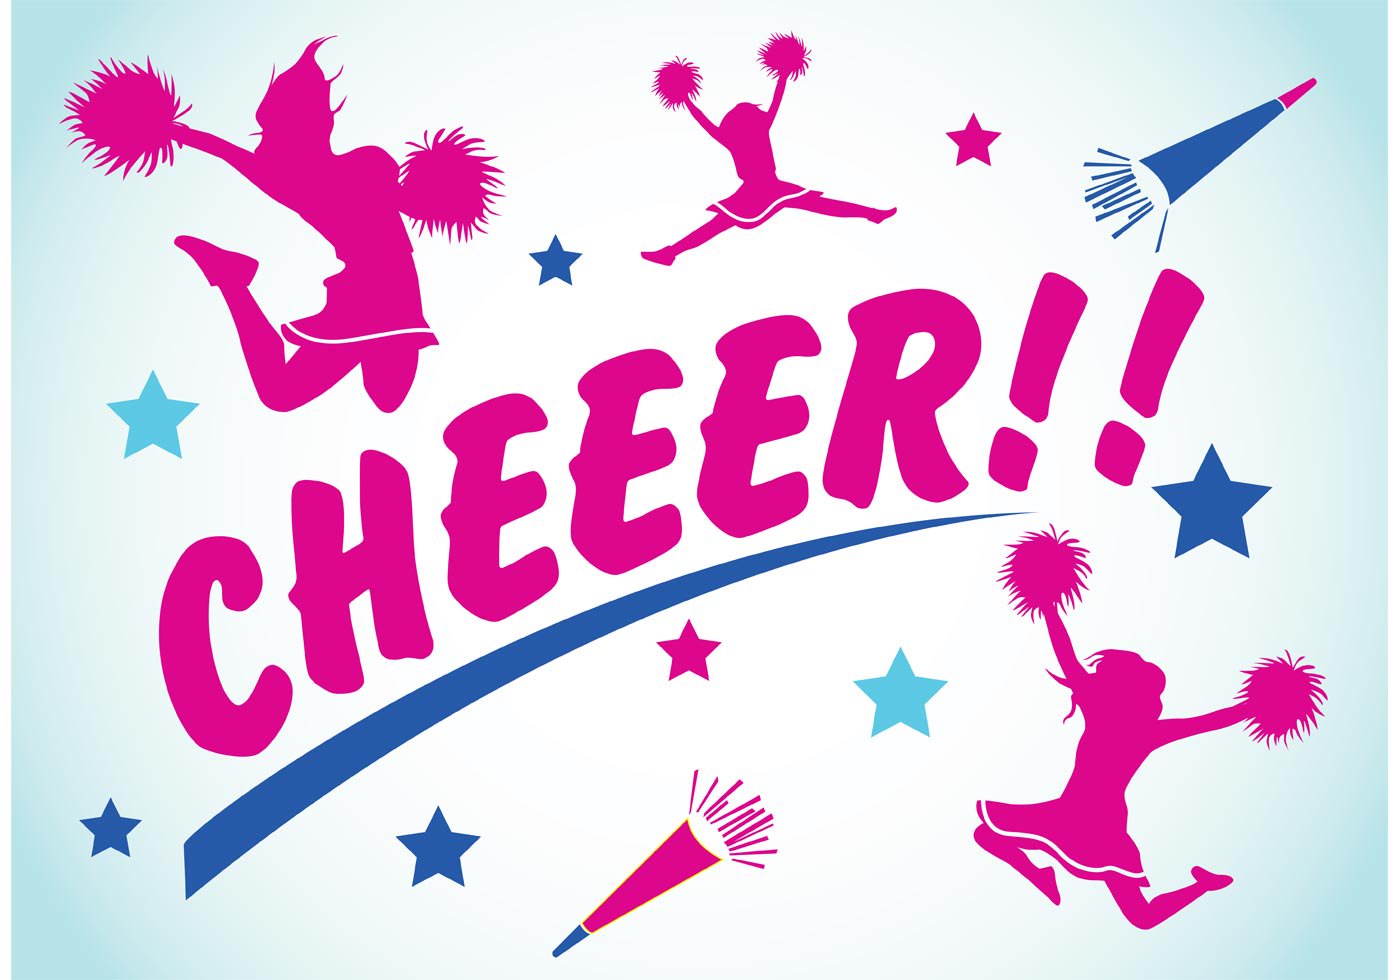 73 Cheer Wallpapers And Backgrounds On WallpaperSafari.